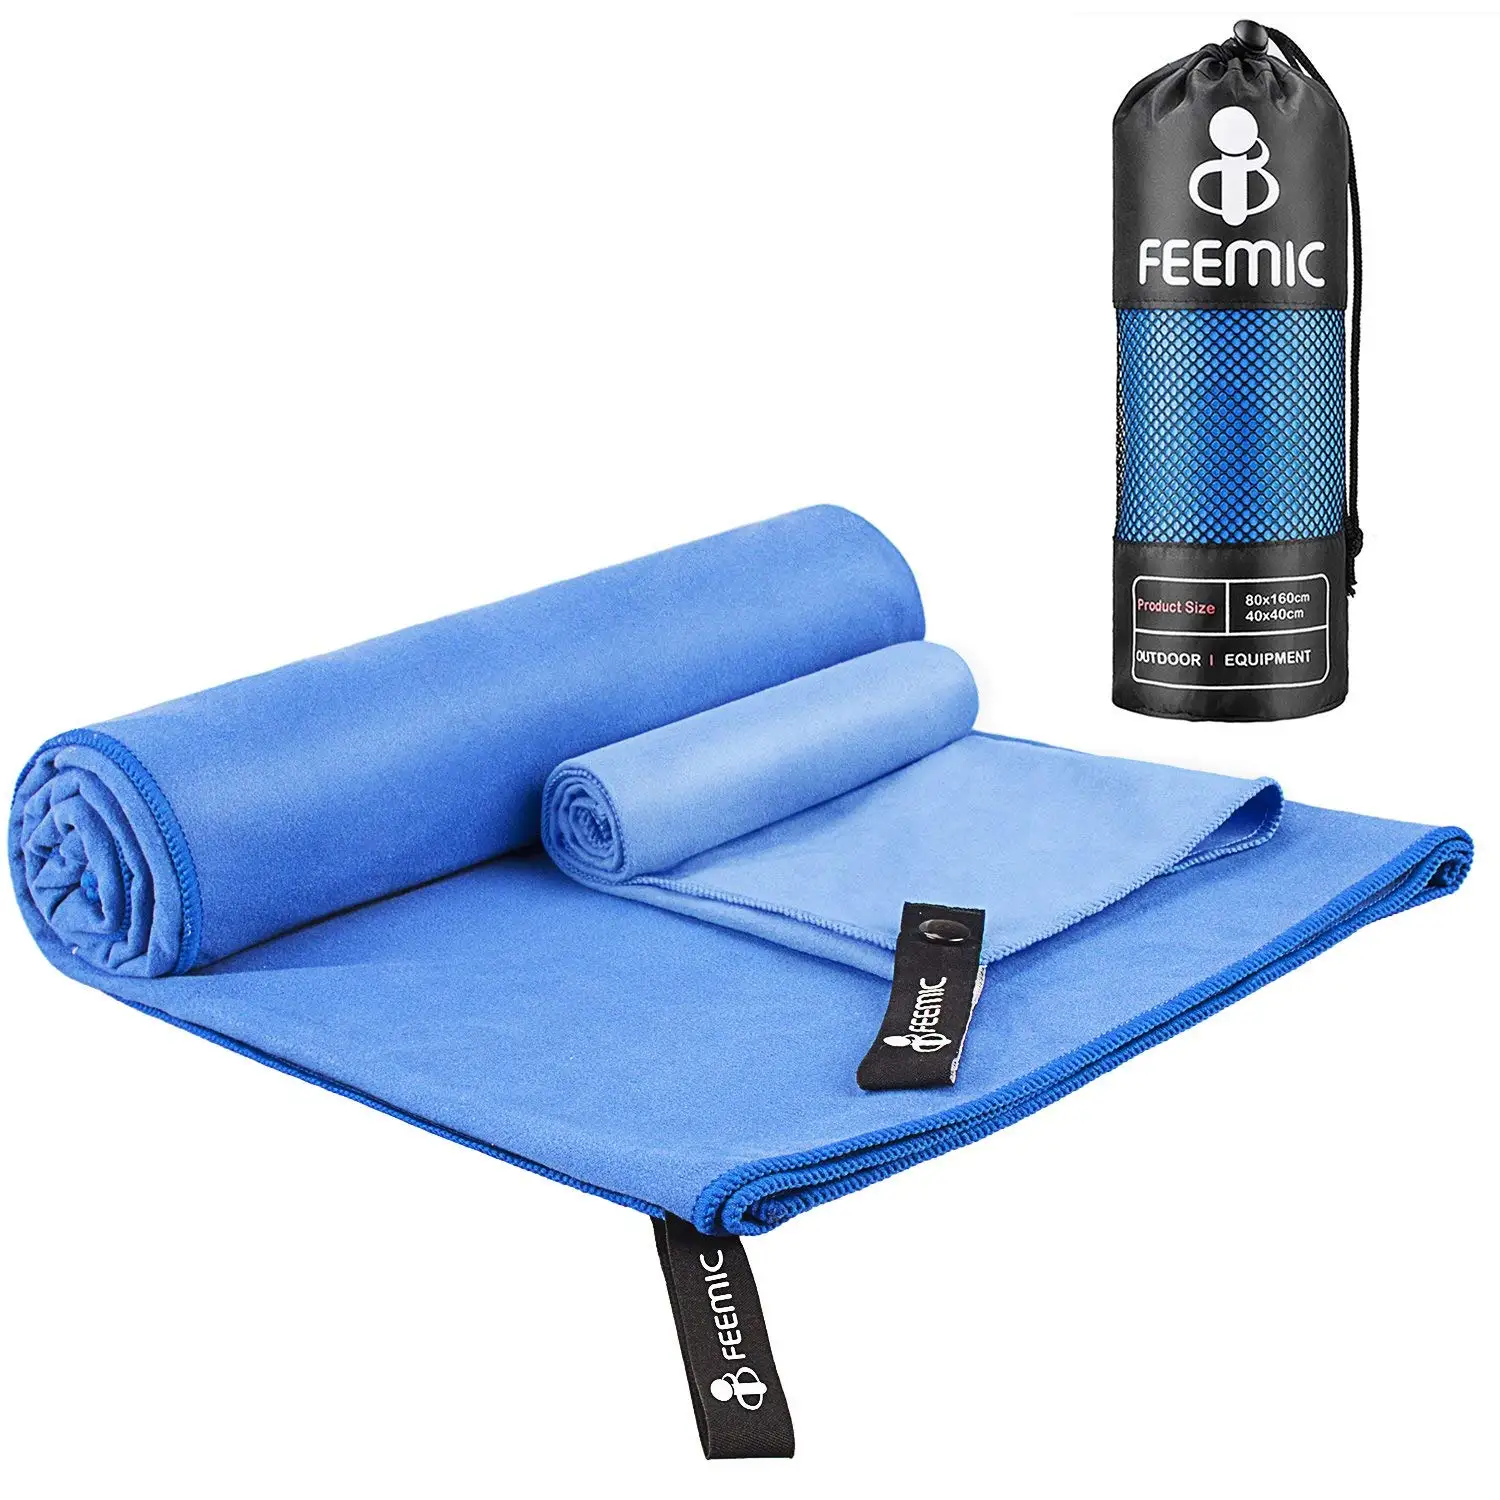 Cheap Gym Workout Towels Find Gym Workout Towels Deals On